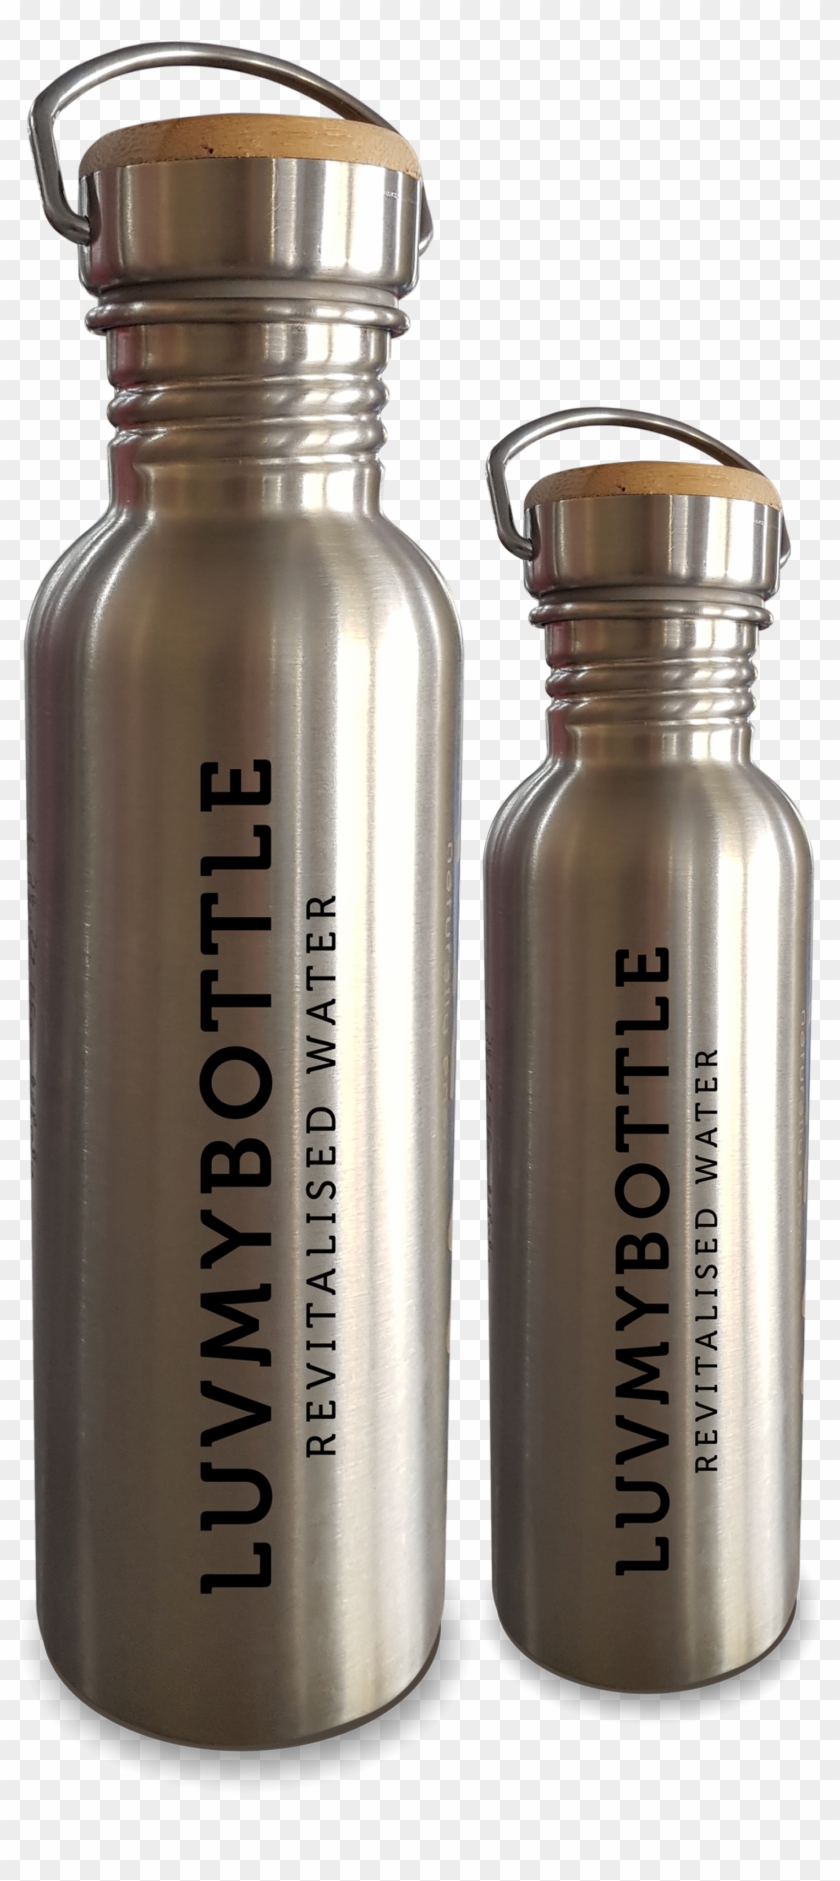 The Bottle That Revitalises Tap Water And Hydrates - Glass Bottle Clipart #1460369